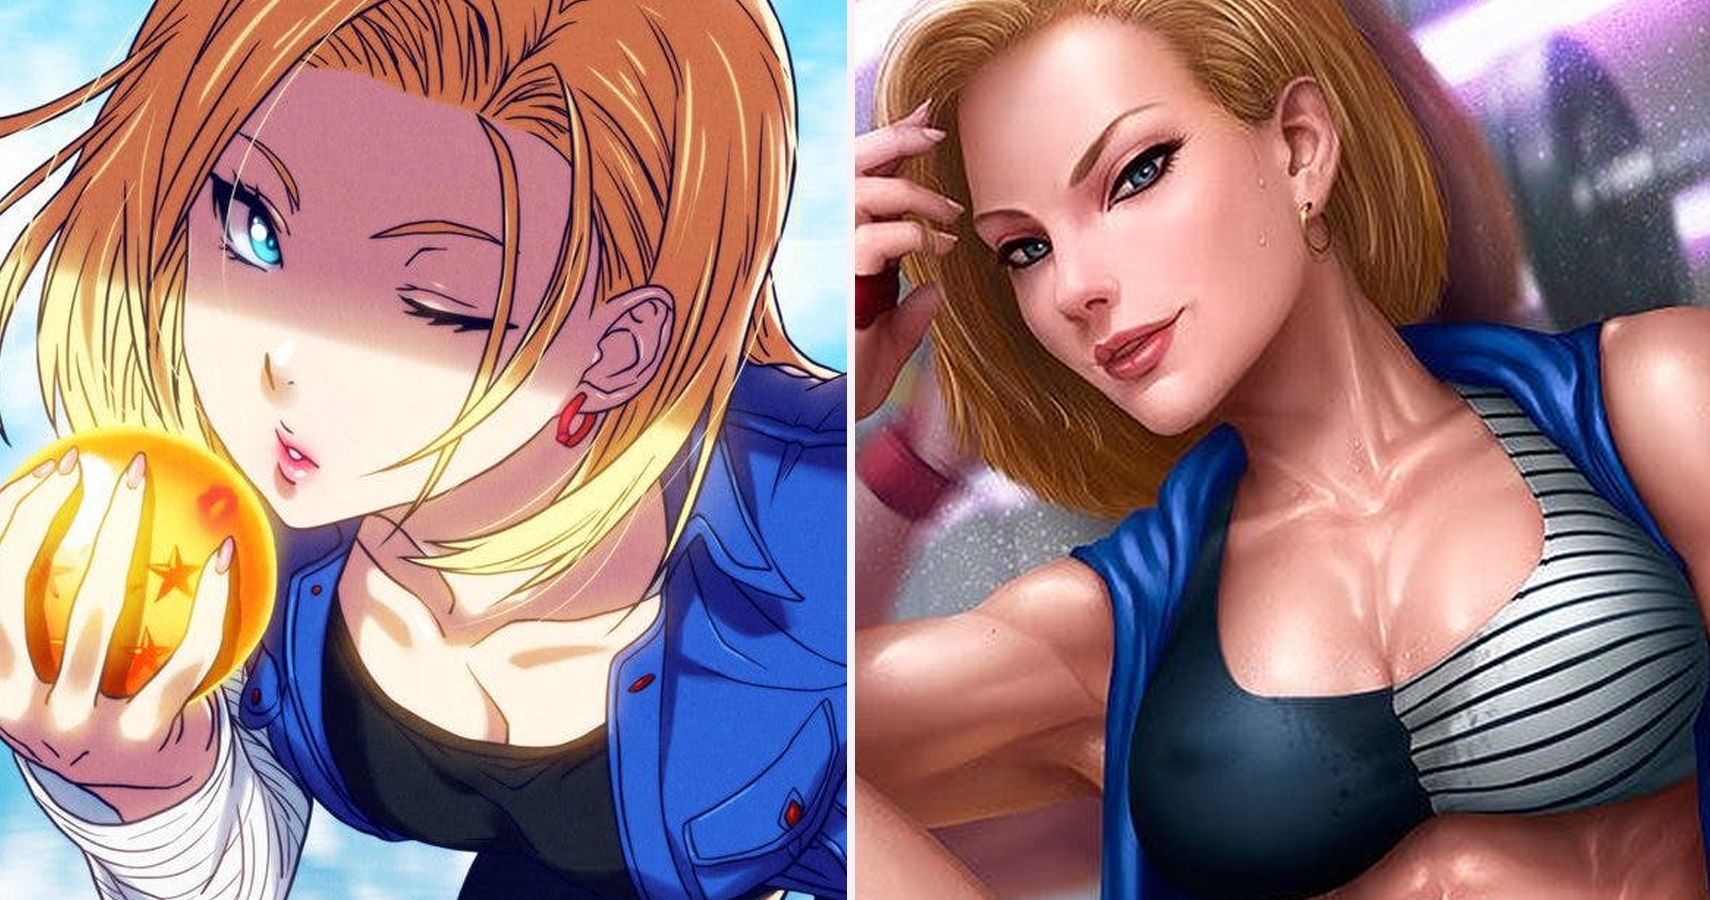 Gear Turning Steamy Android 18 Fan Art Images That Go Too Far.